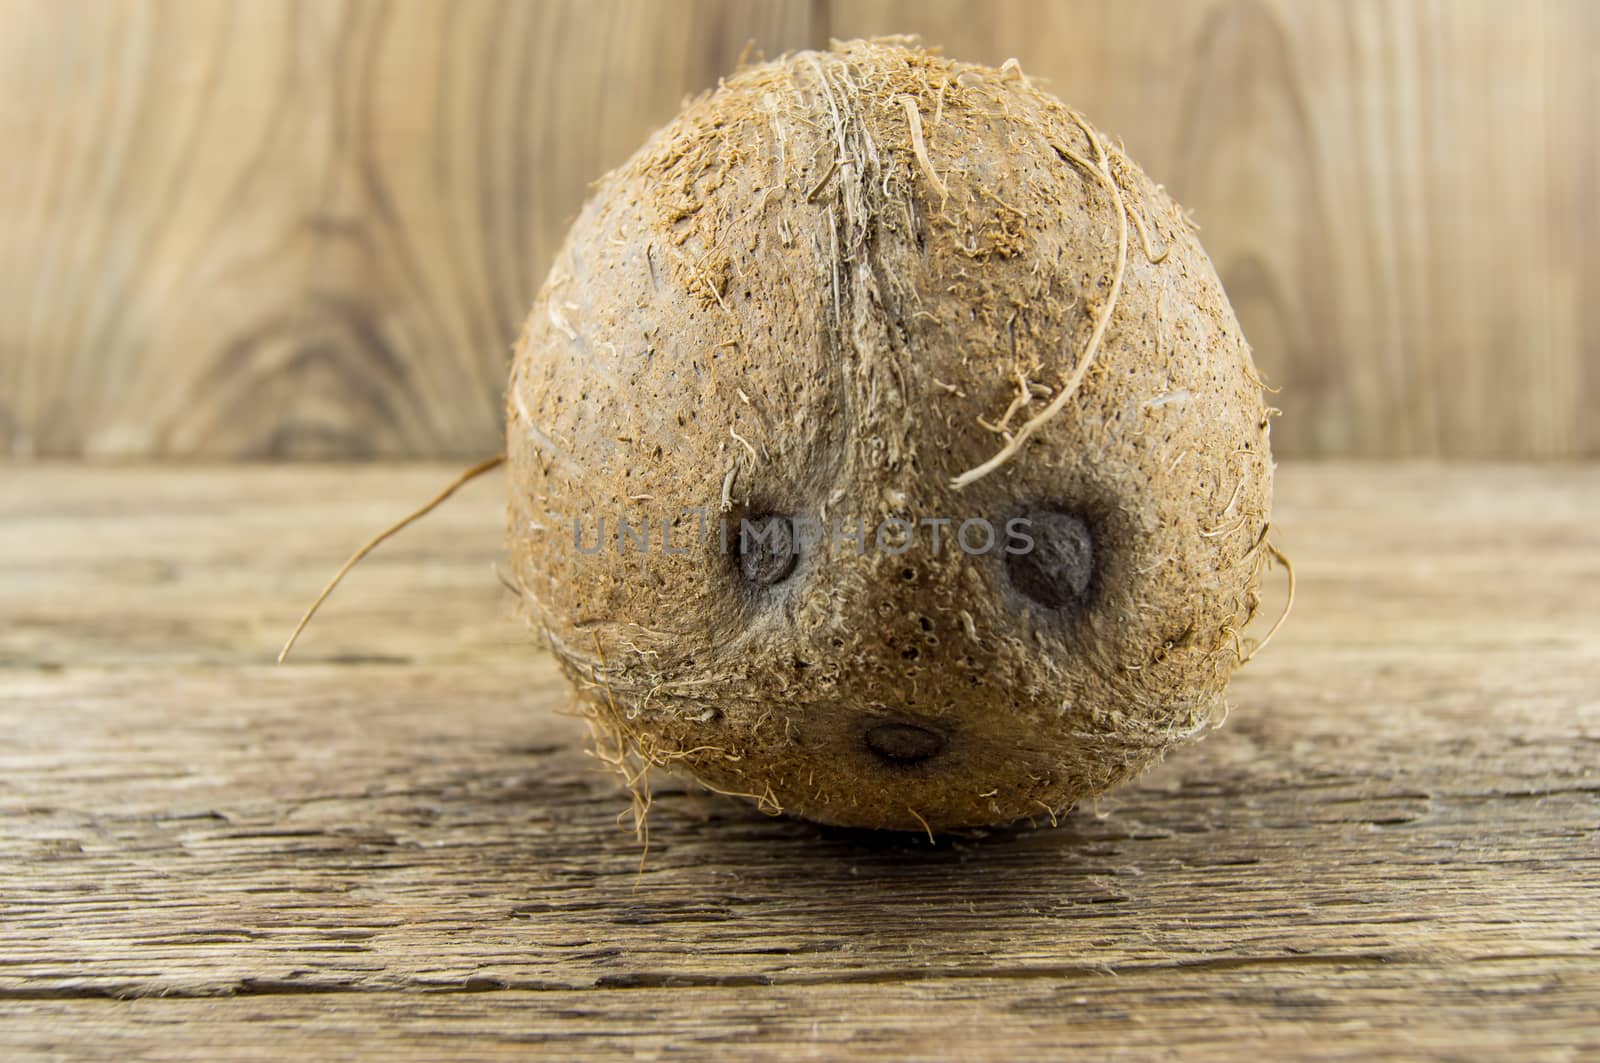 coconut and lie on a wooden background.